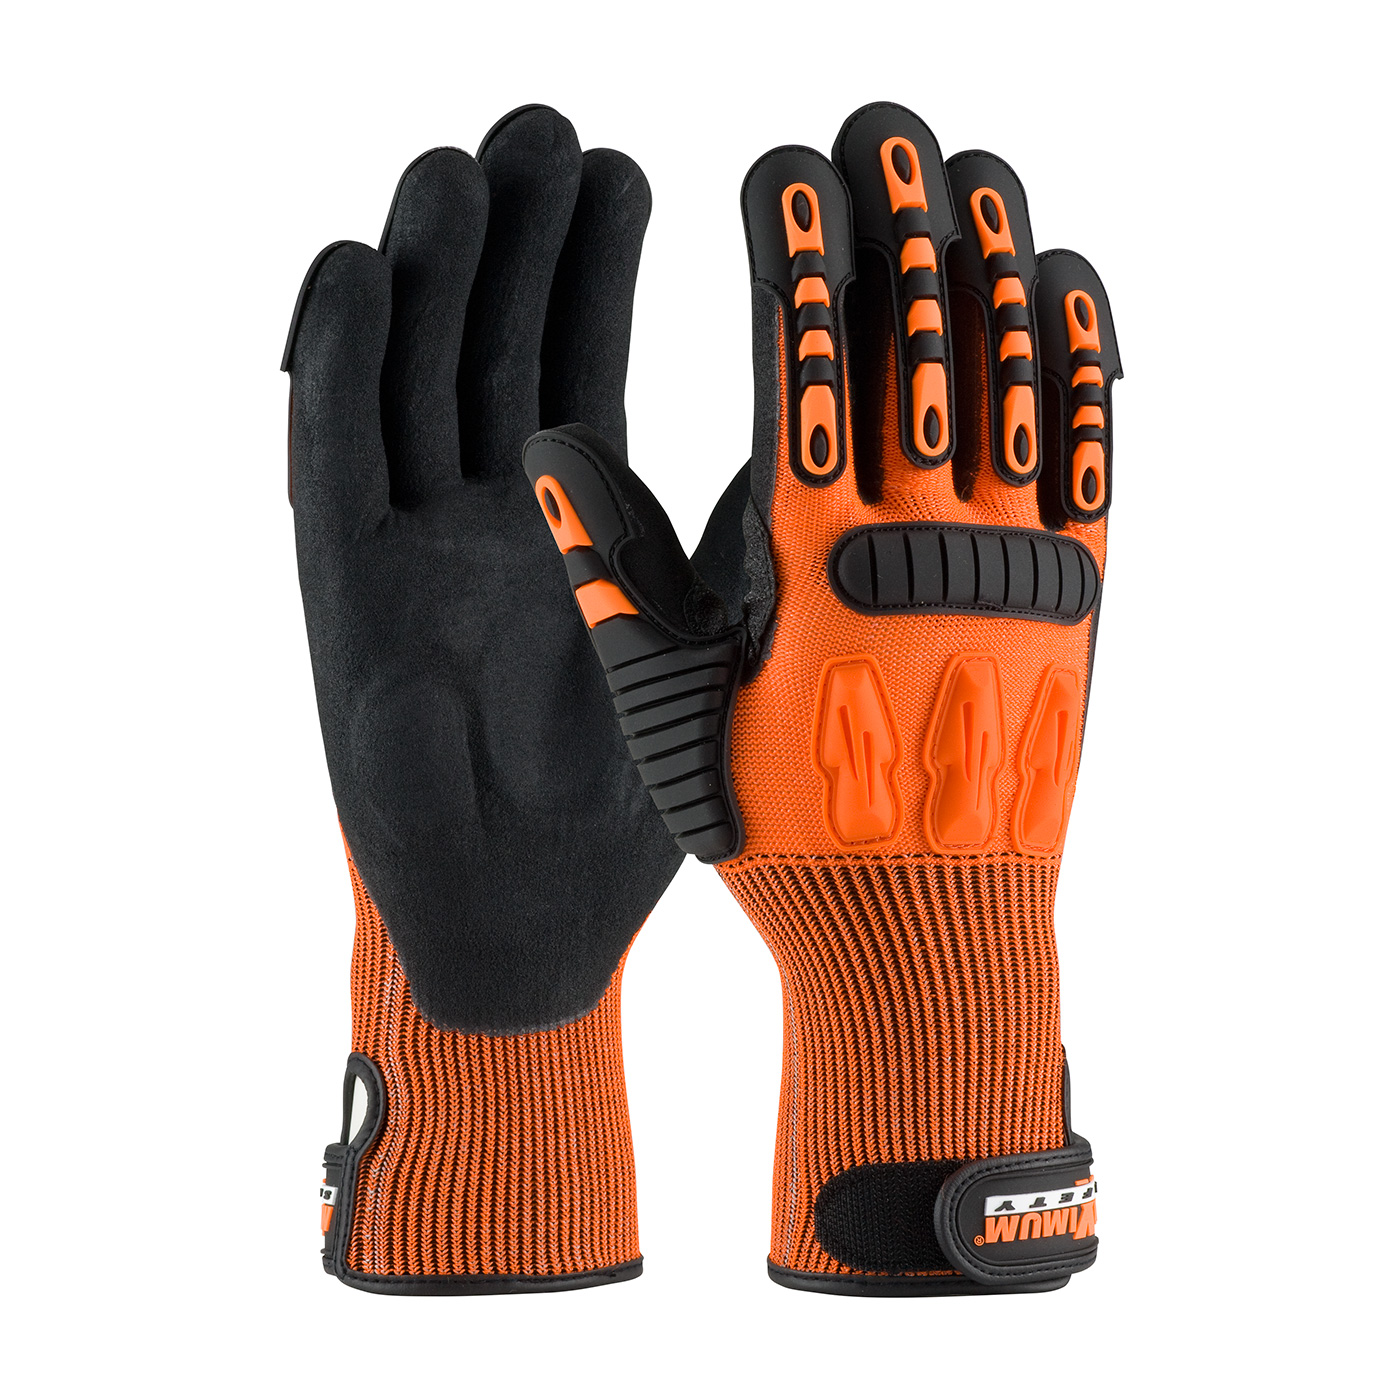 TUFFMAX5™ SEAMLESS KNIT HPPE BLEND WITH NITRILE GRIP AND TPR IMPACT PROTECTION